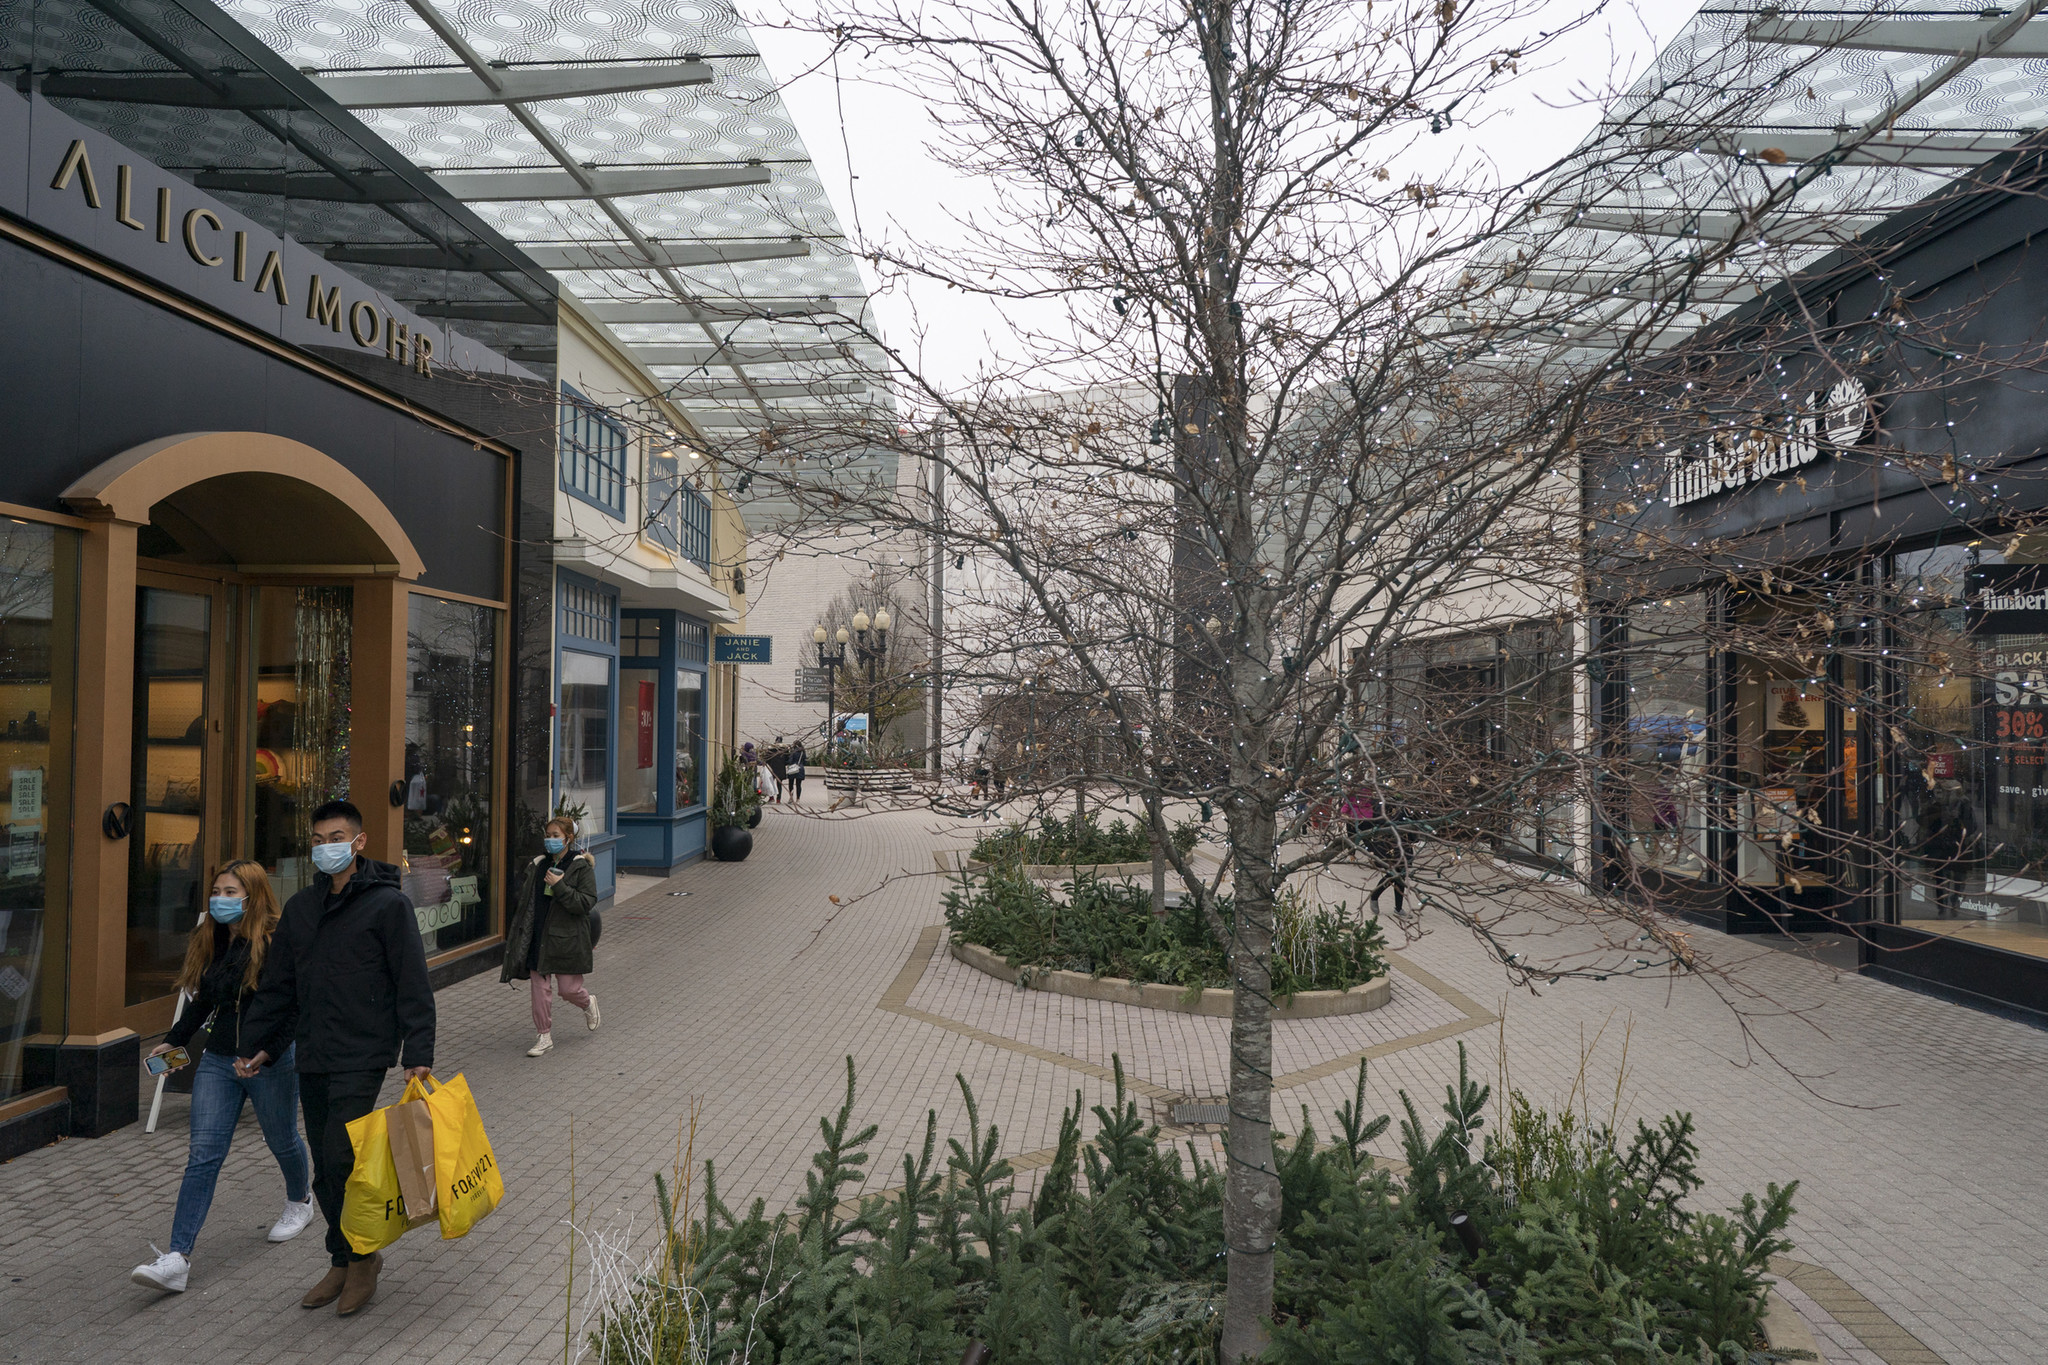 Skokie votes to designate Old Orchard Mall as a business district